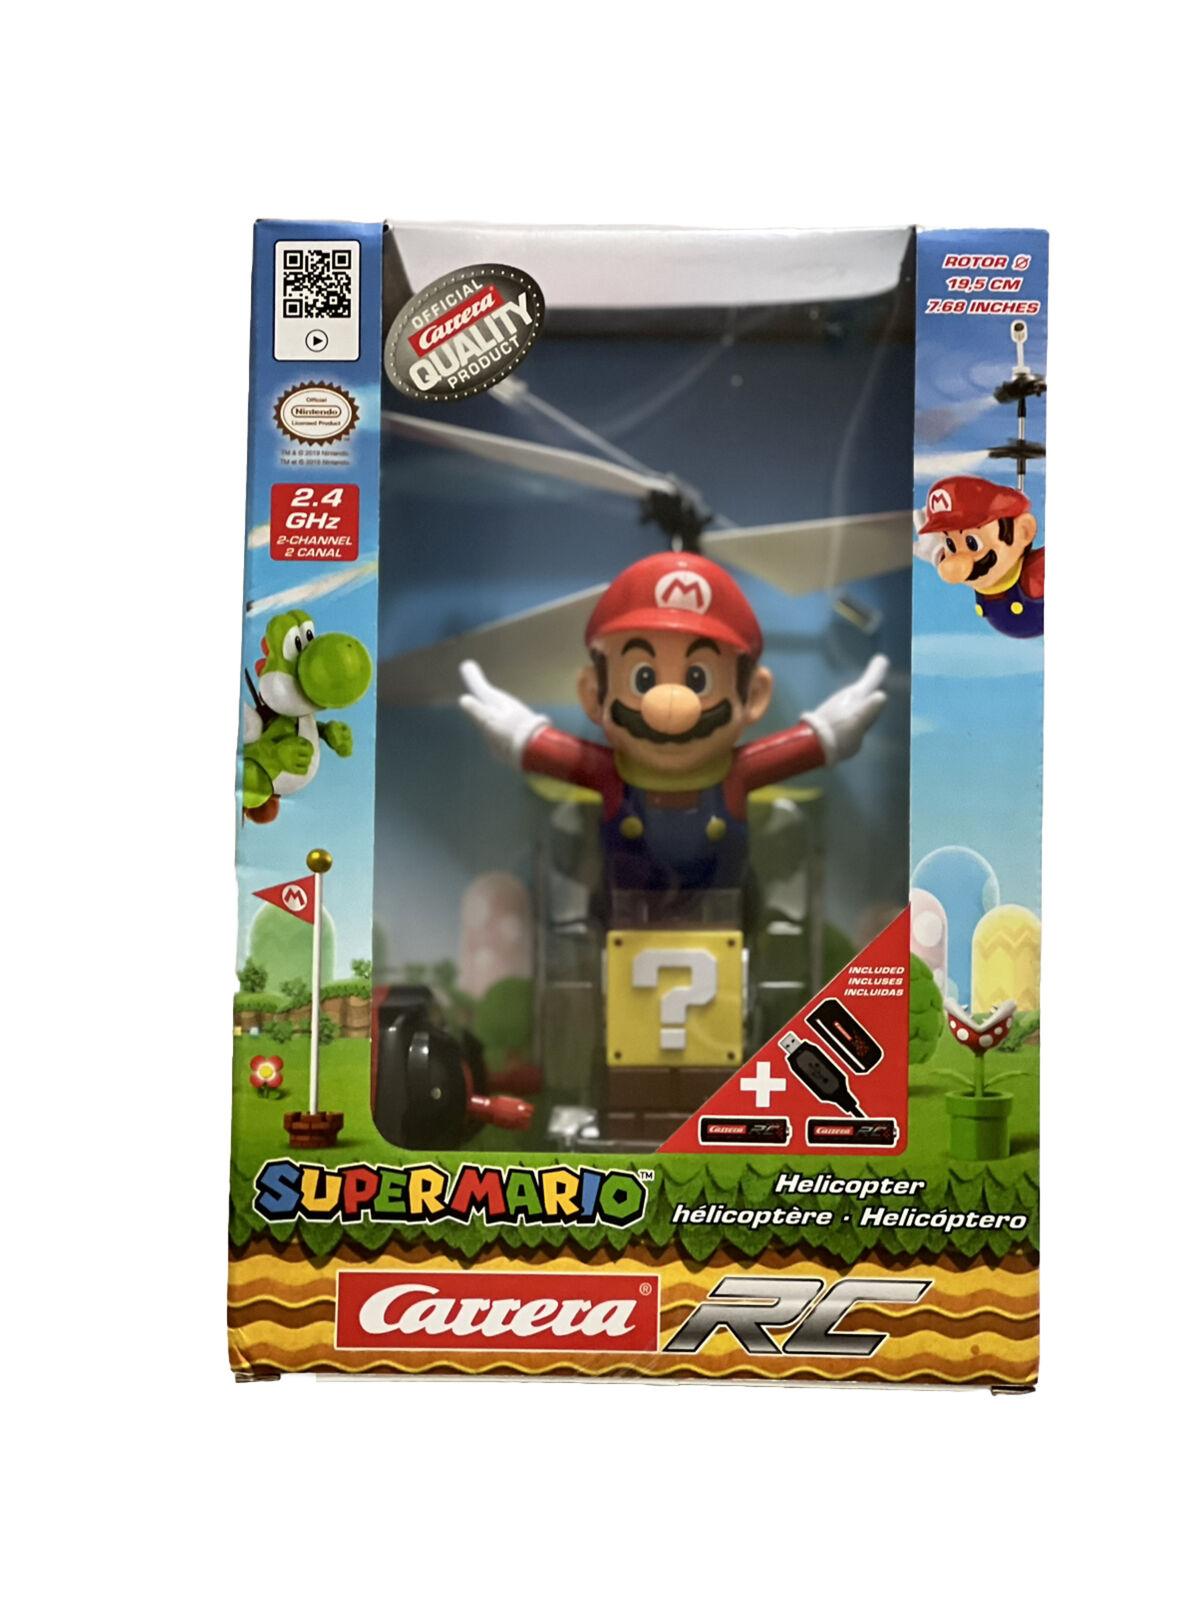 Carrera Rc Mario Helicopter: Experience the Fun of Flying with the Carrera RC Mario Helicopter